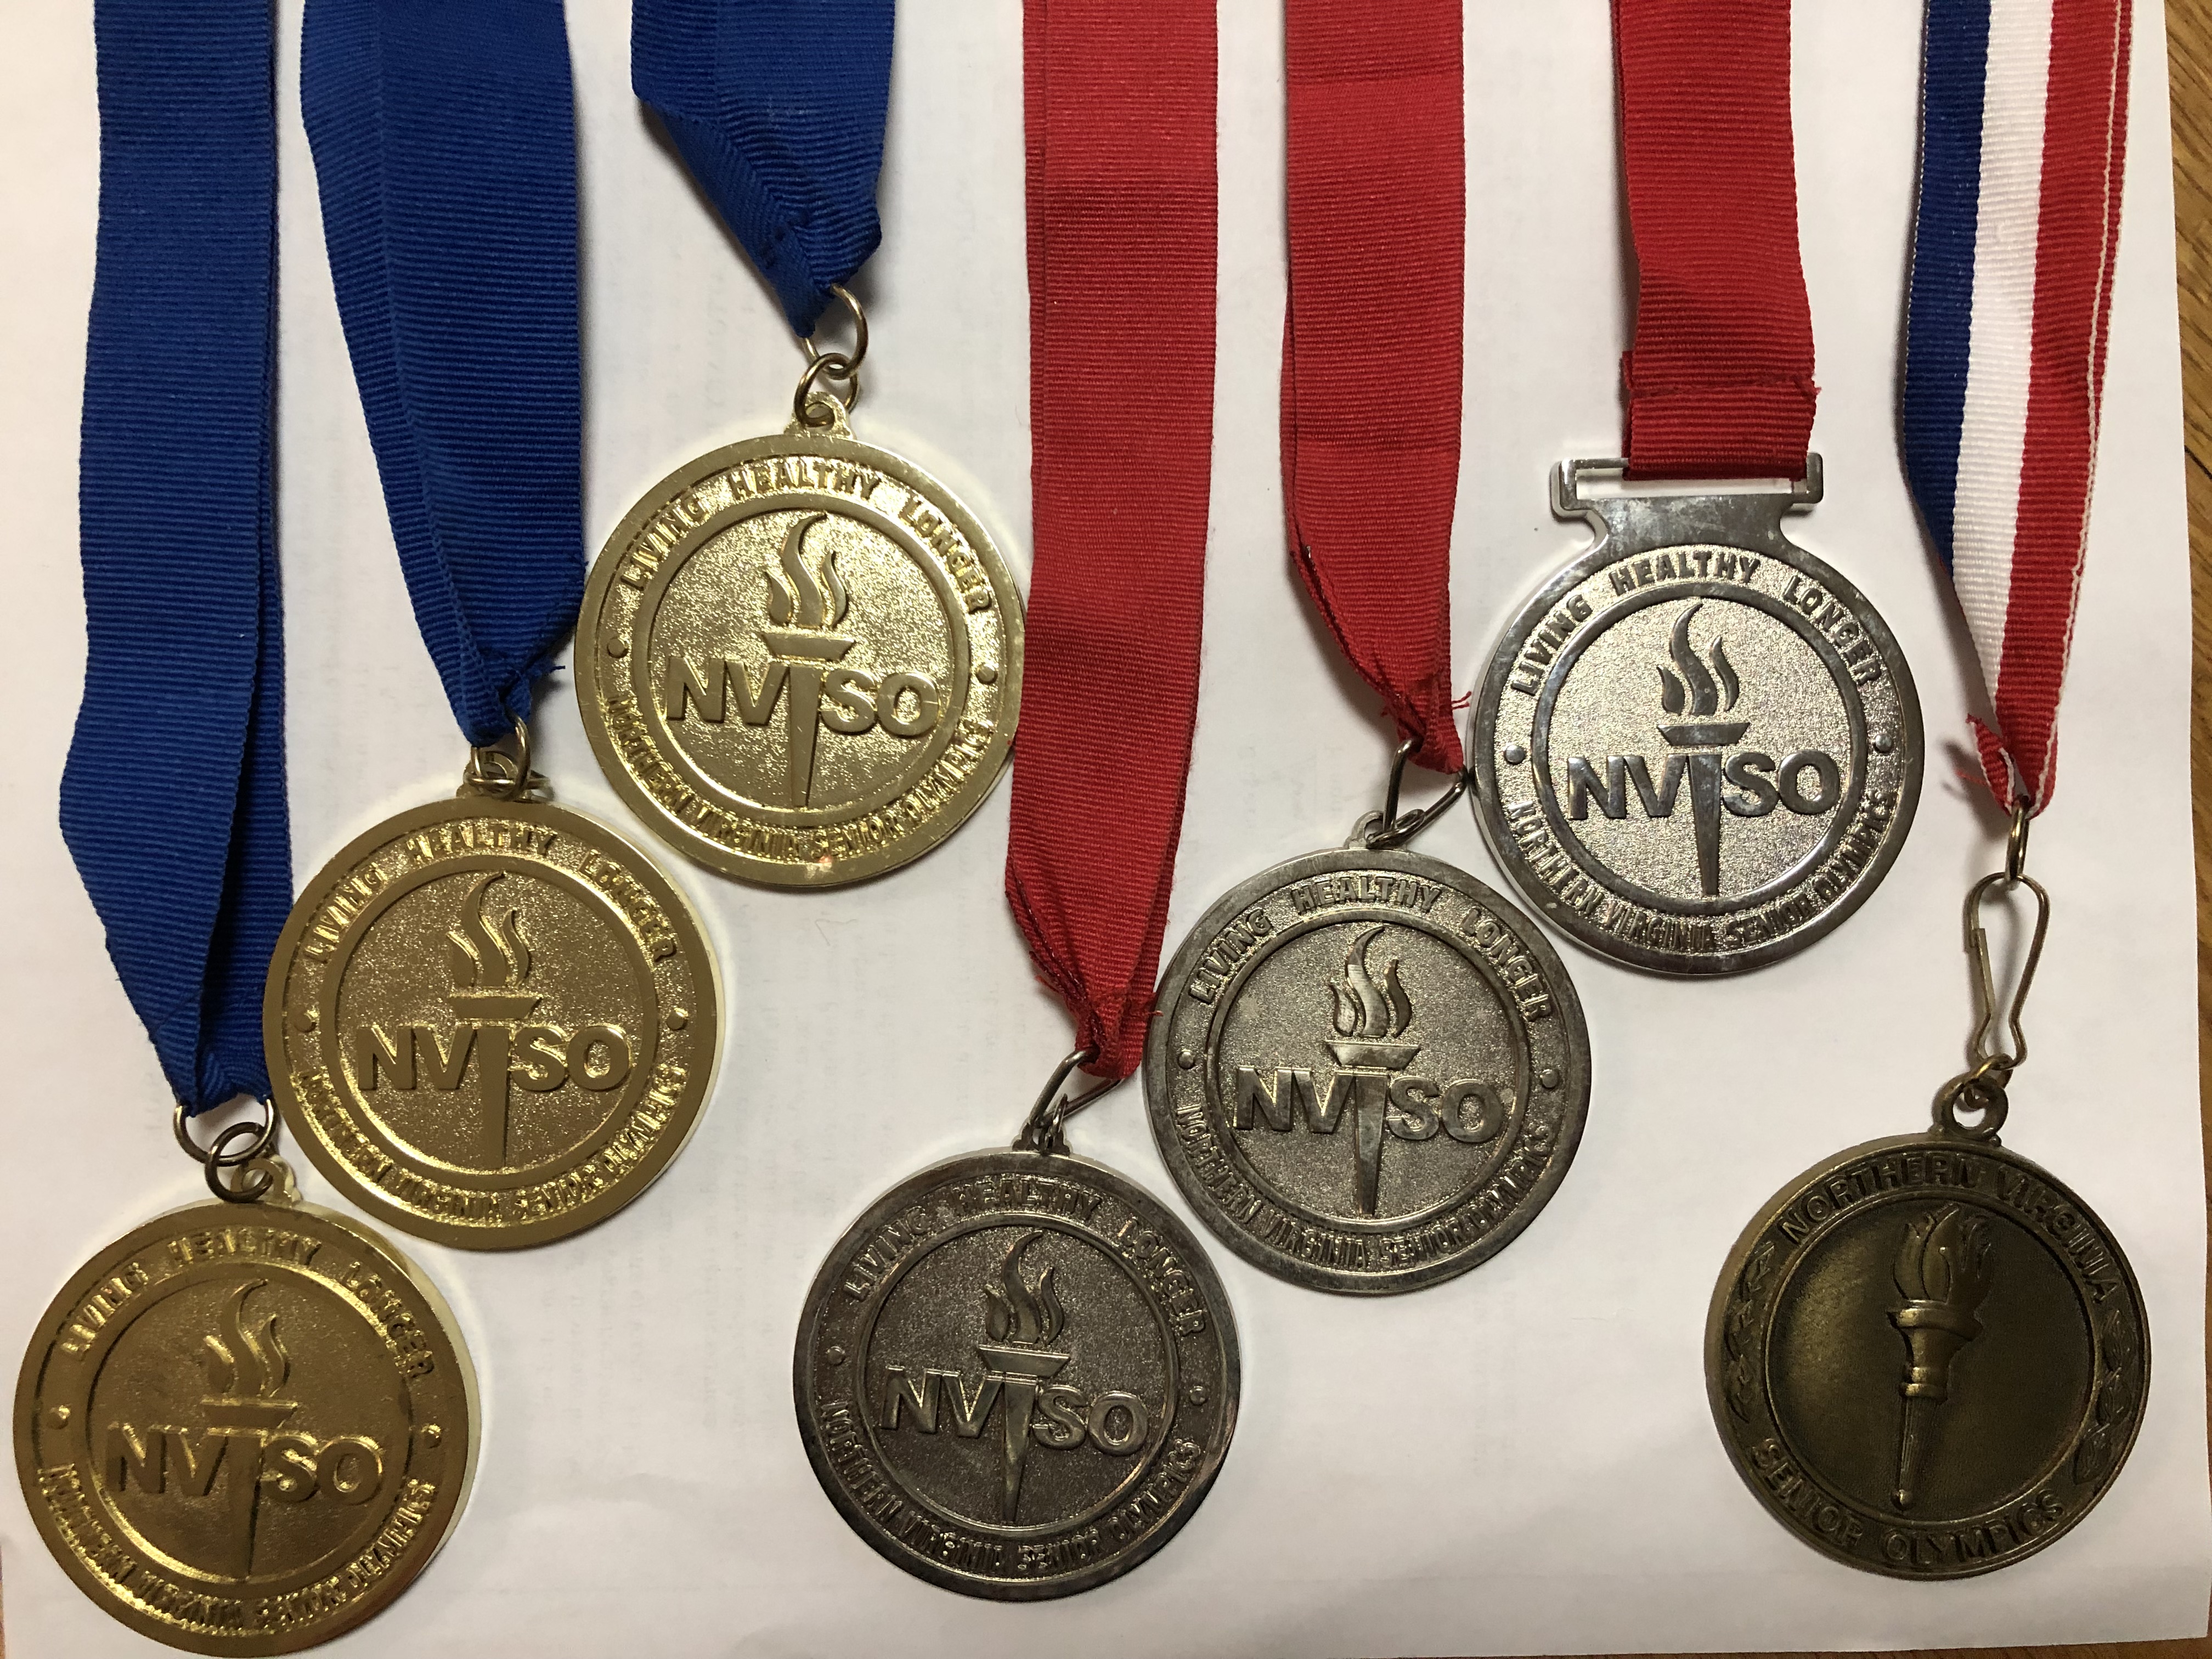 Ed_HarborChase_Ping Pong Medals